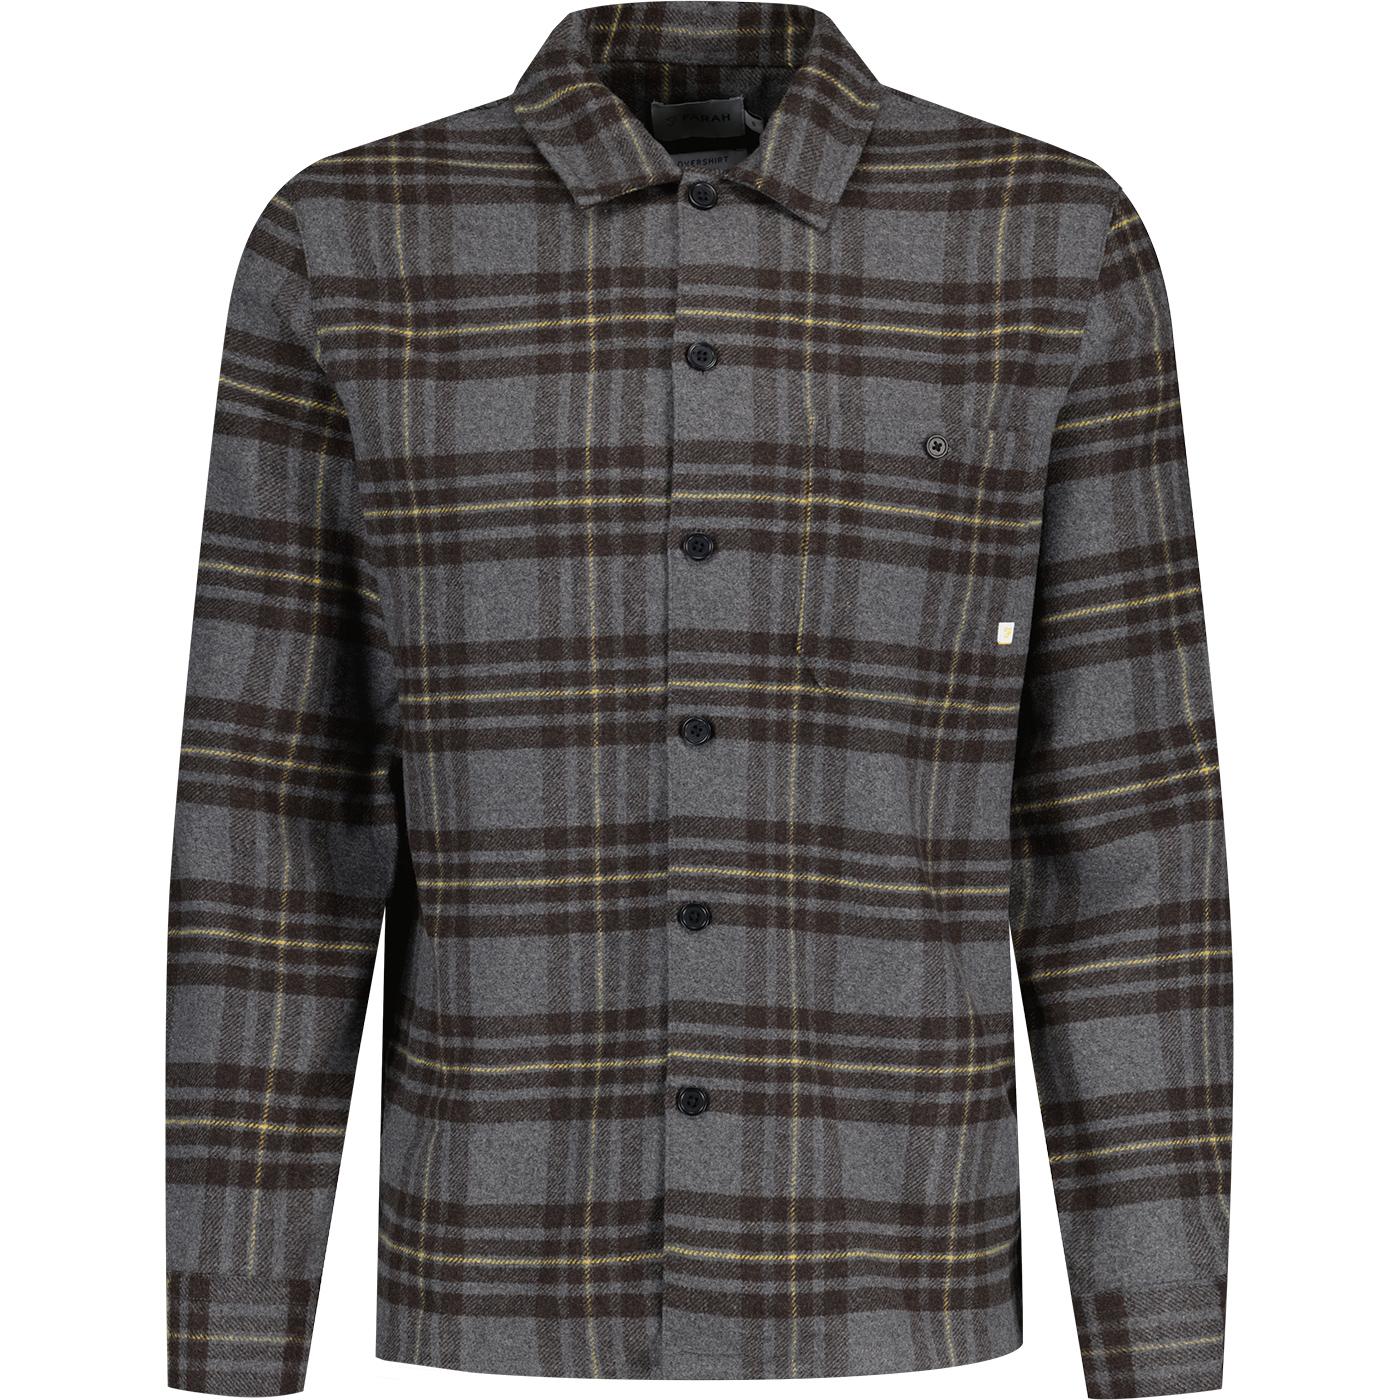 Fred Perry Wool Blend Overshirt, Charcoal Marl